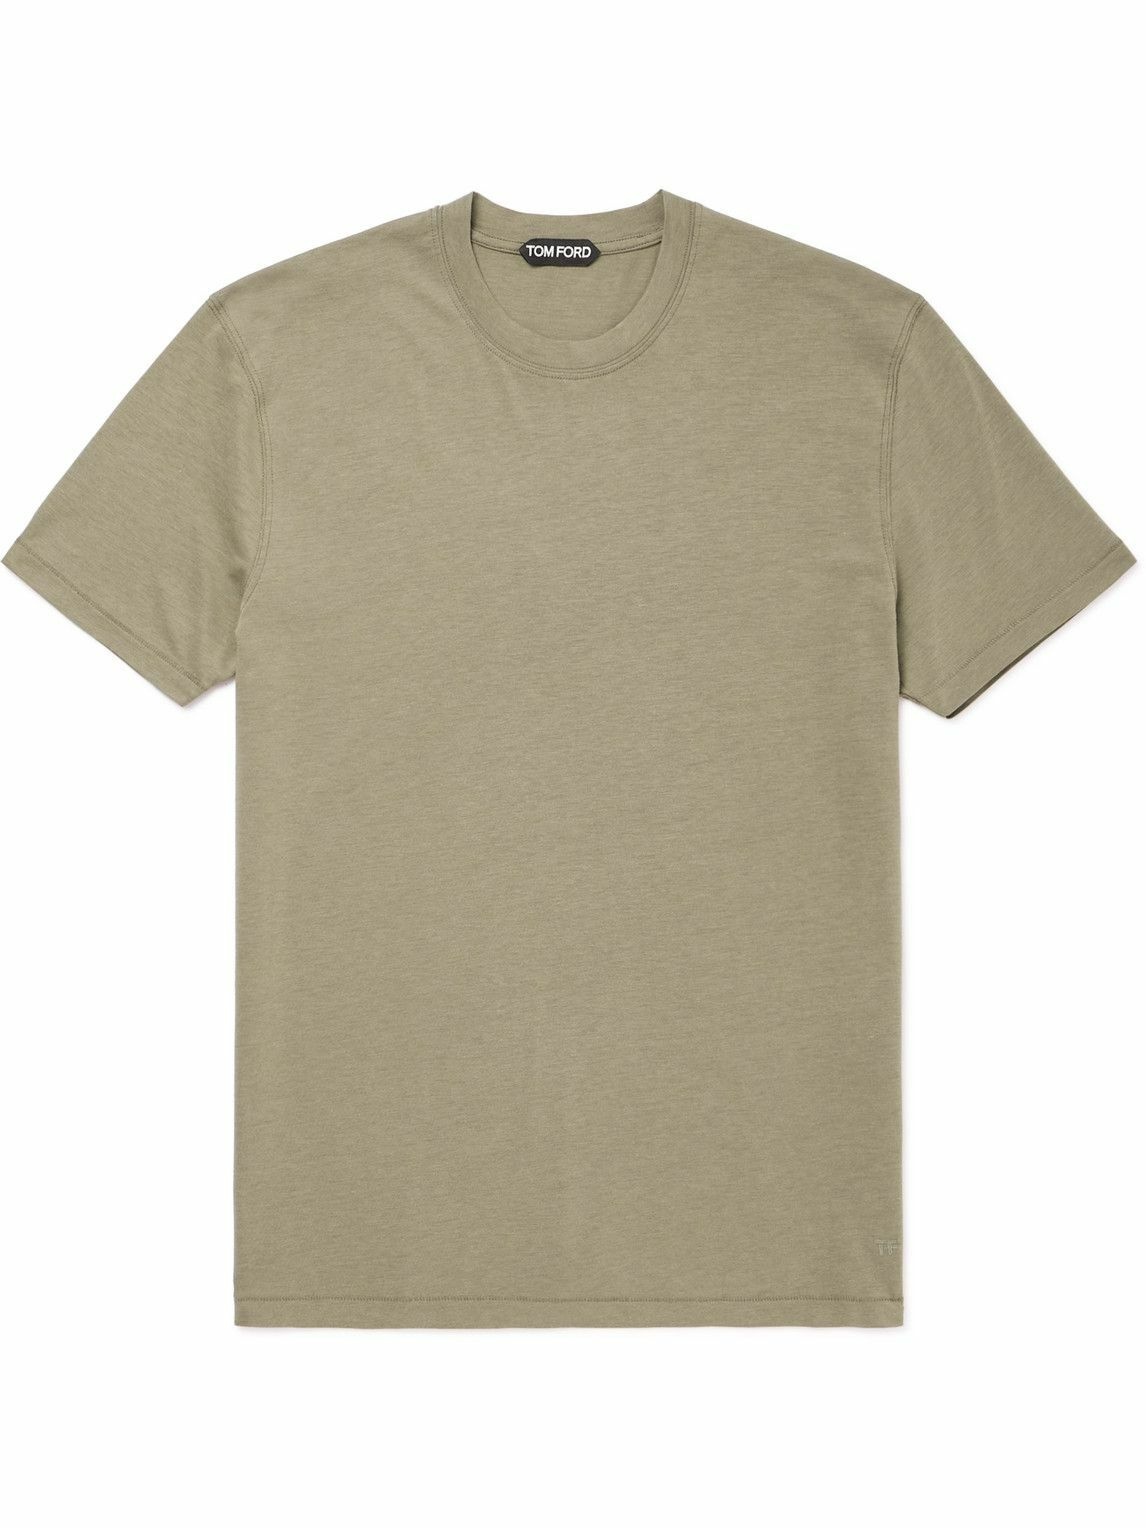 TOM FORD - Slim-Fit Lyocell and Cotton-Blend Jersey T-Shirt - Green TOM ...